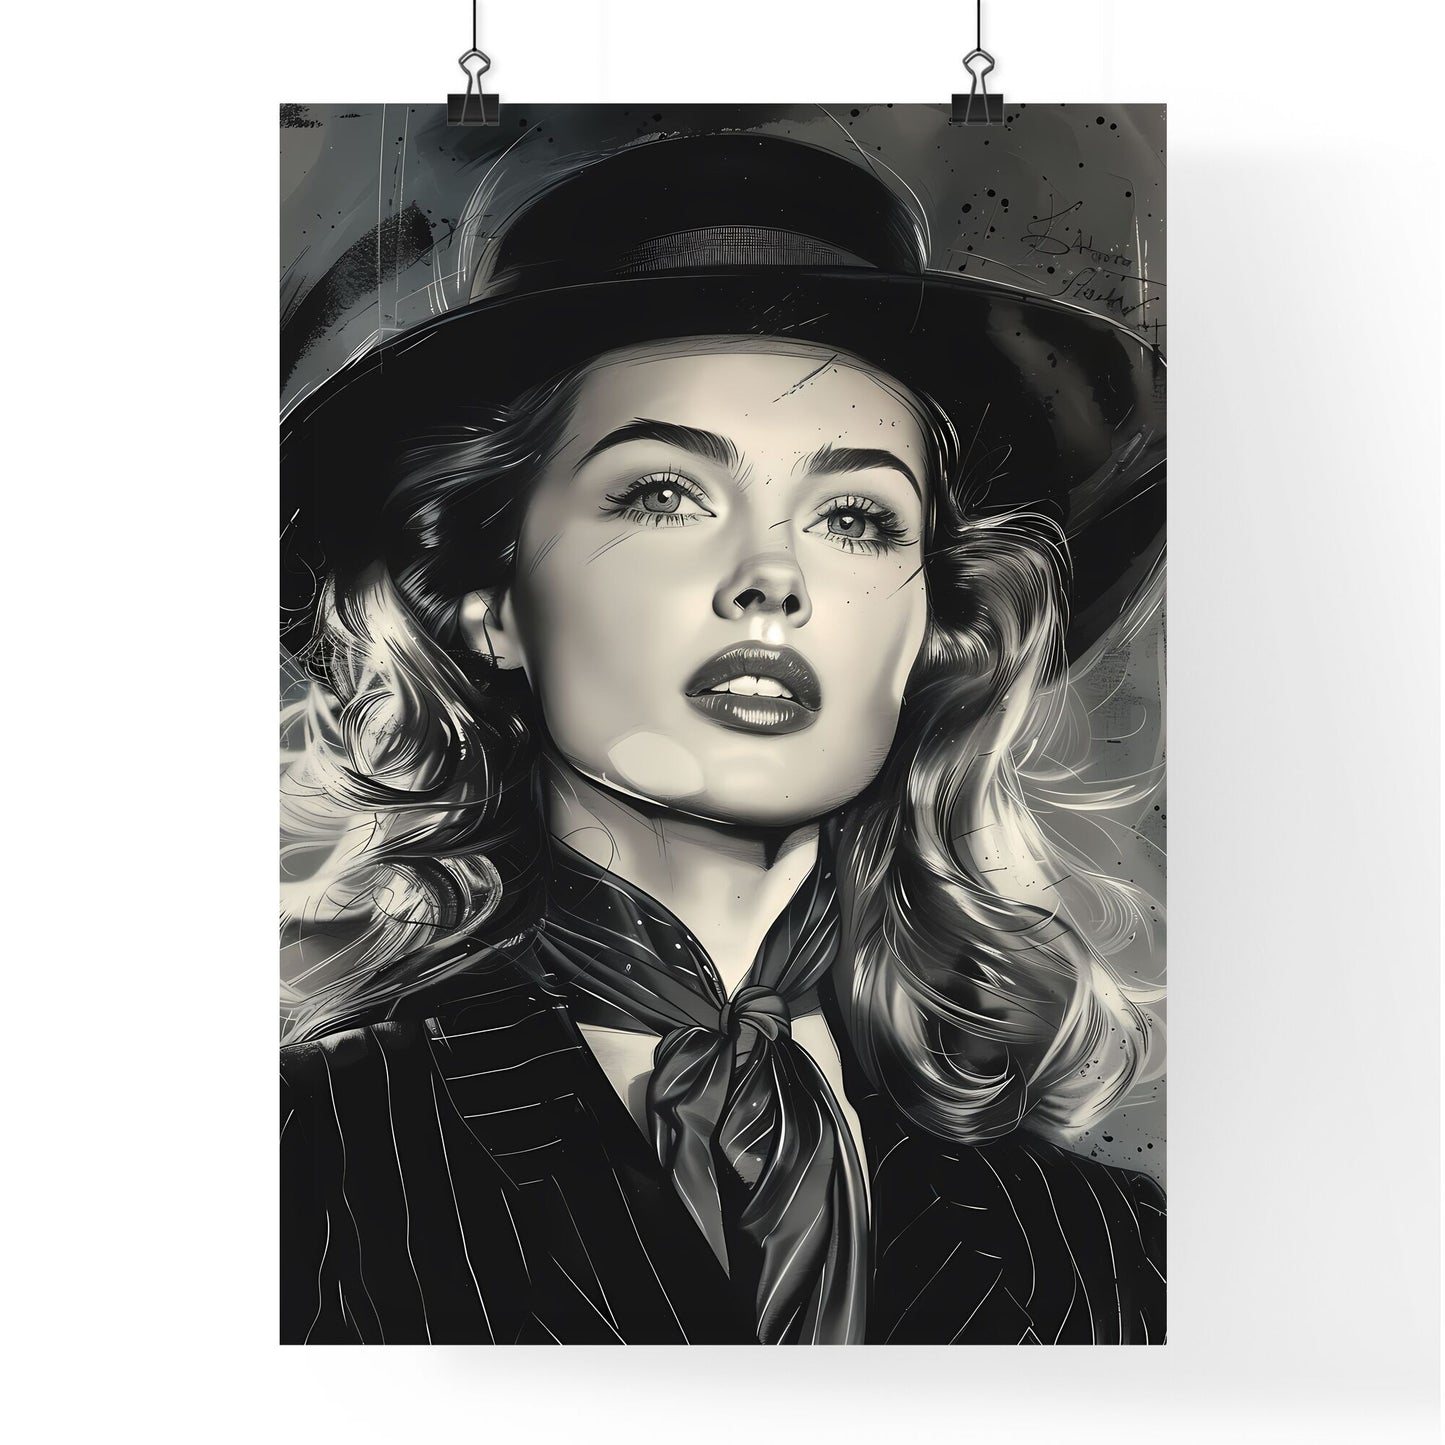 Monumental Noir-Style Black and White Painting of a Hatted Woman, Emphasizing Colorization and Artistic Detail Default Title